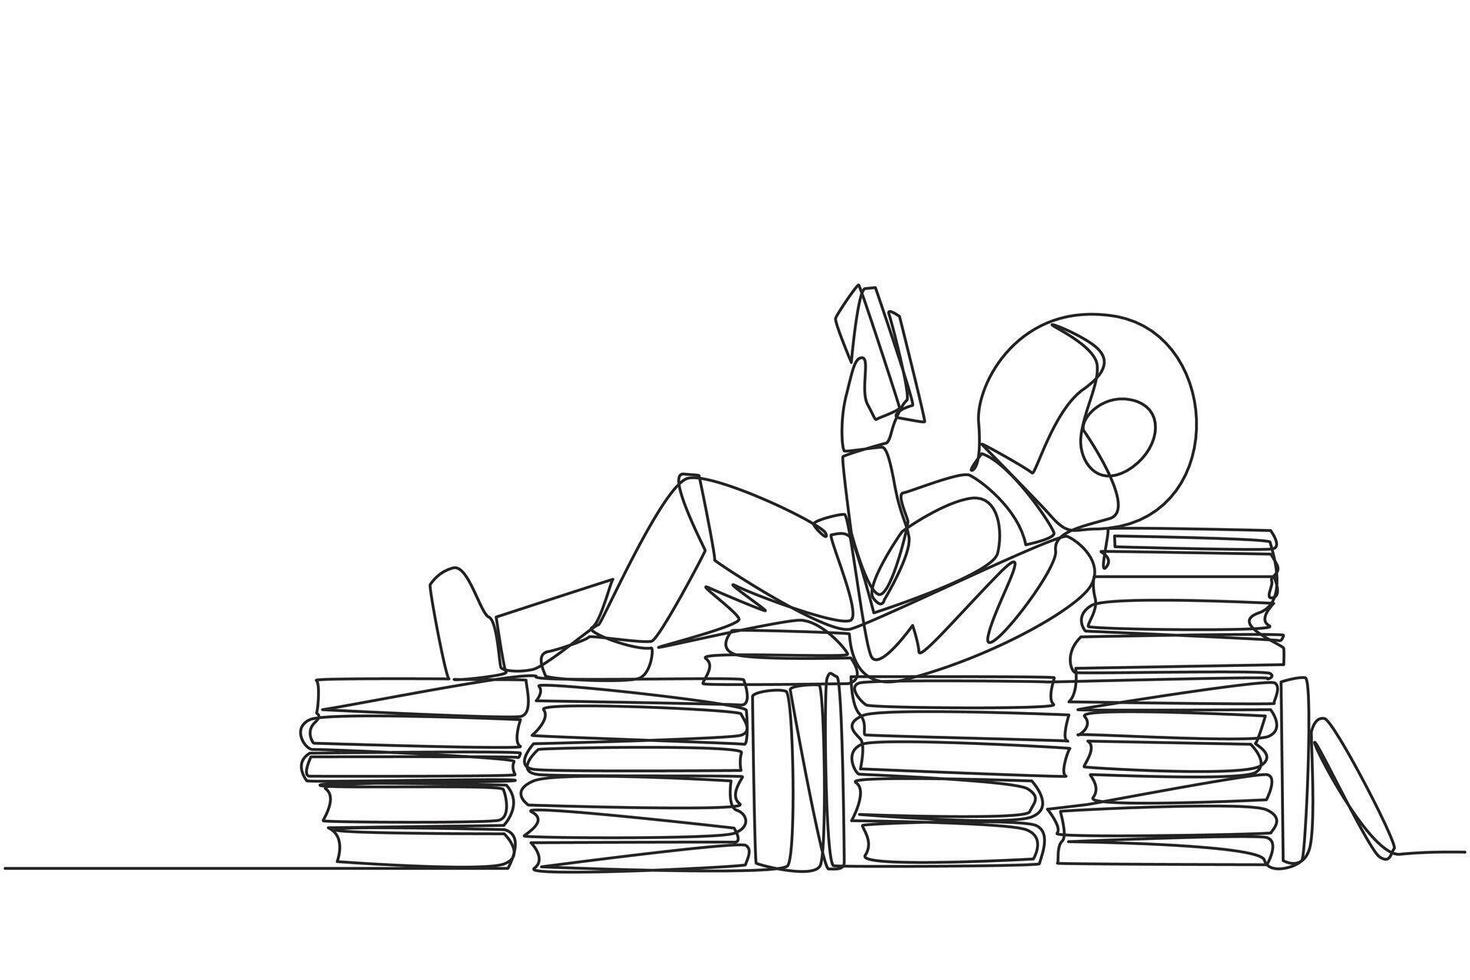 Single one line drawing astronaut lying down on a stack of books lined up. Relax while reading the fiction book. Enjoy the storyline. Book festival concept. Continuous line design vector